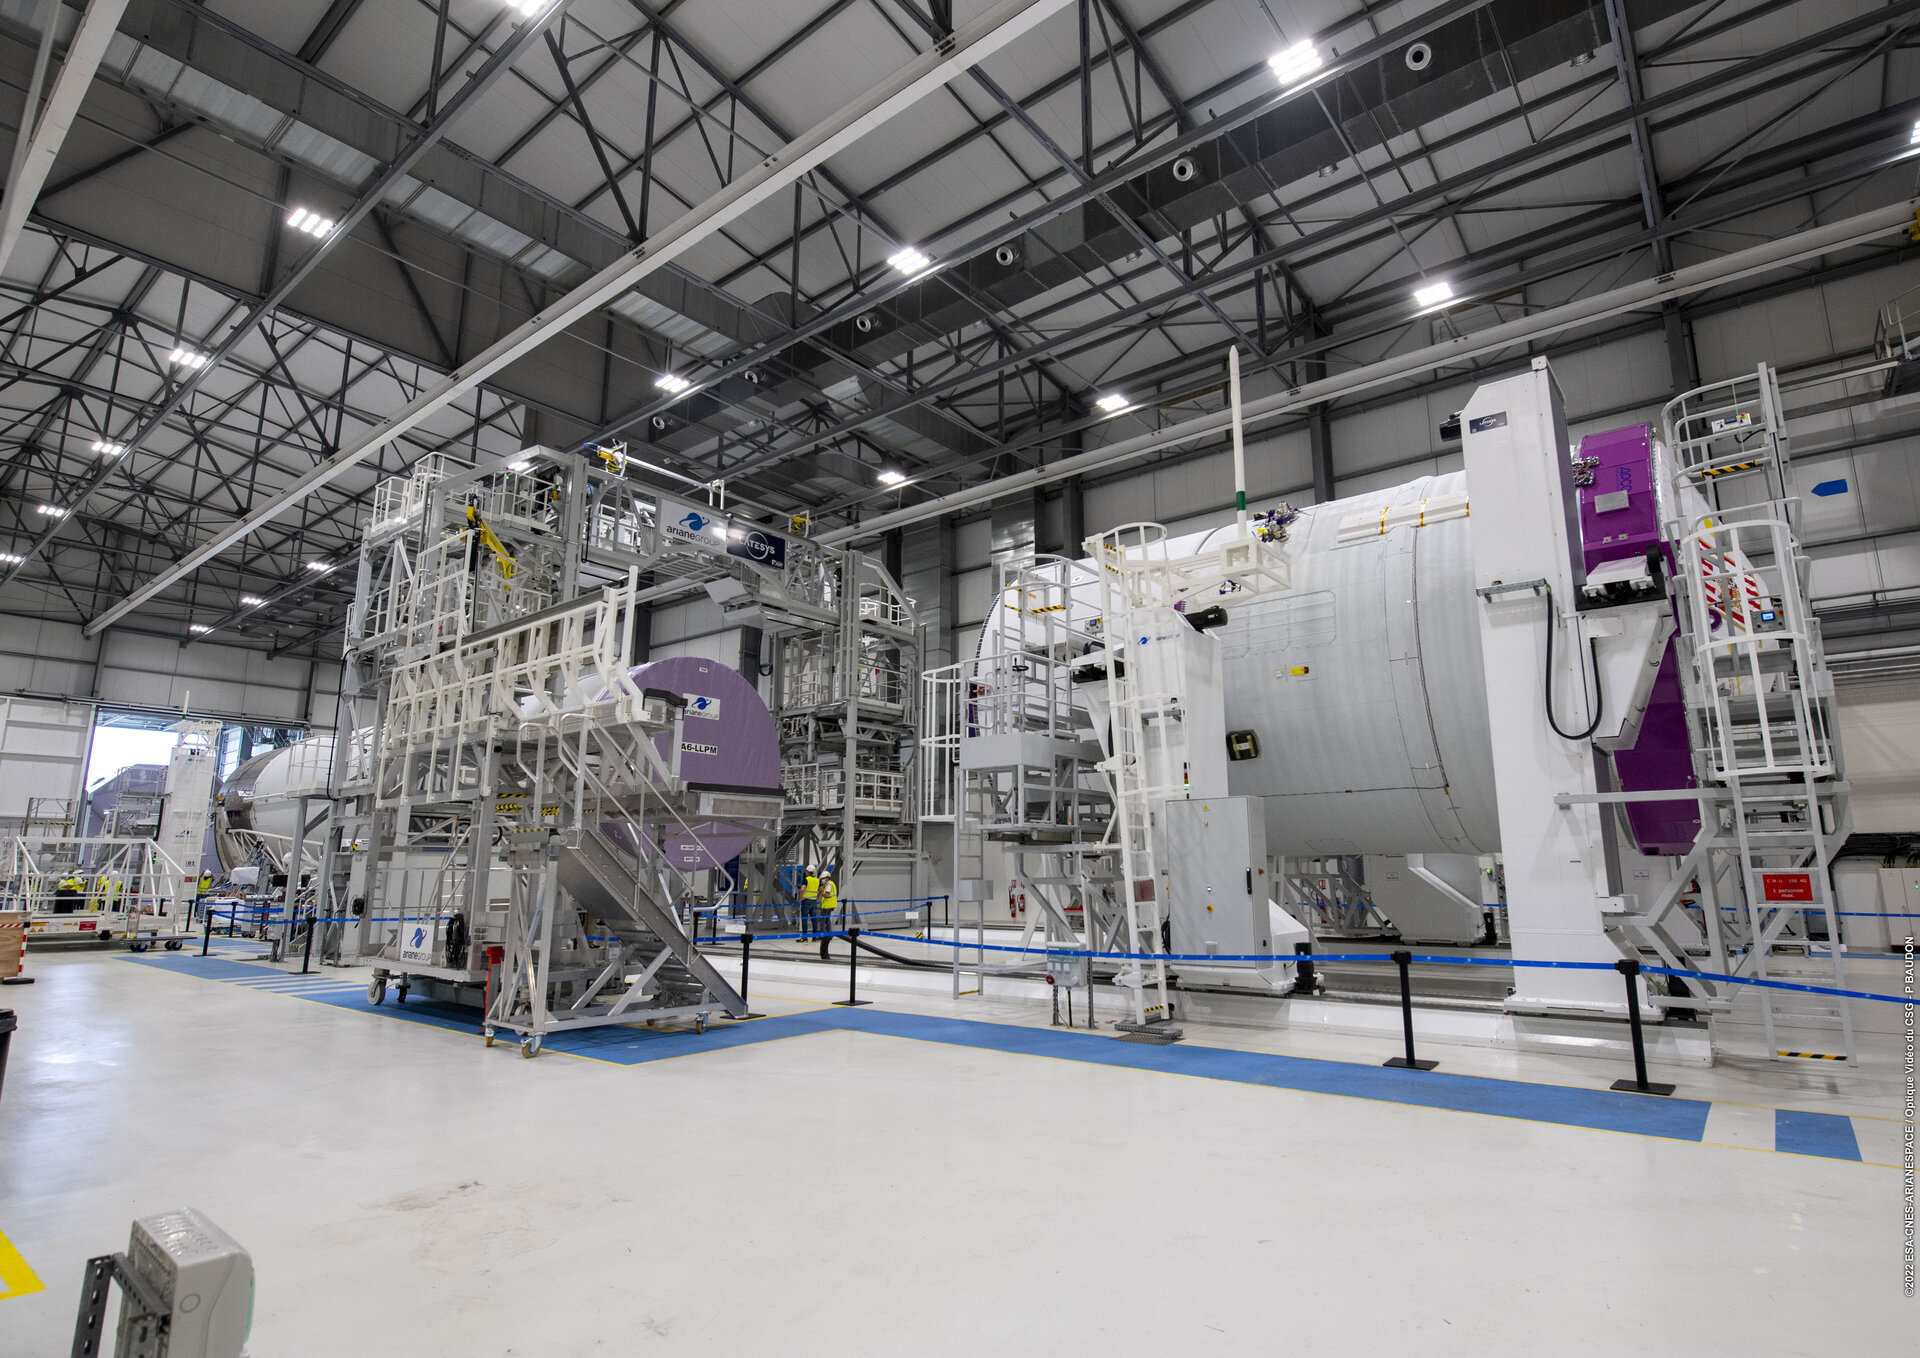 Ariane 6 central core set for assembly in the assembly hall at Europe Spaceport in French Guiana